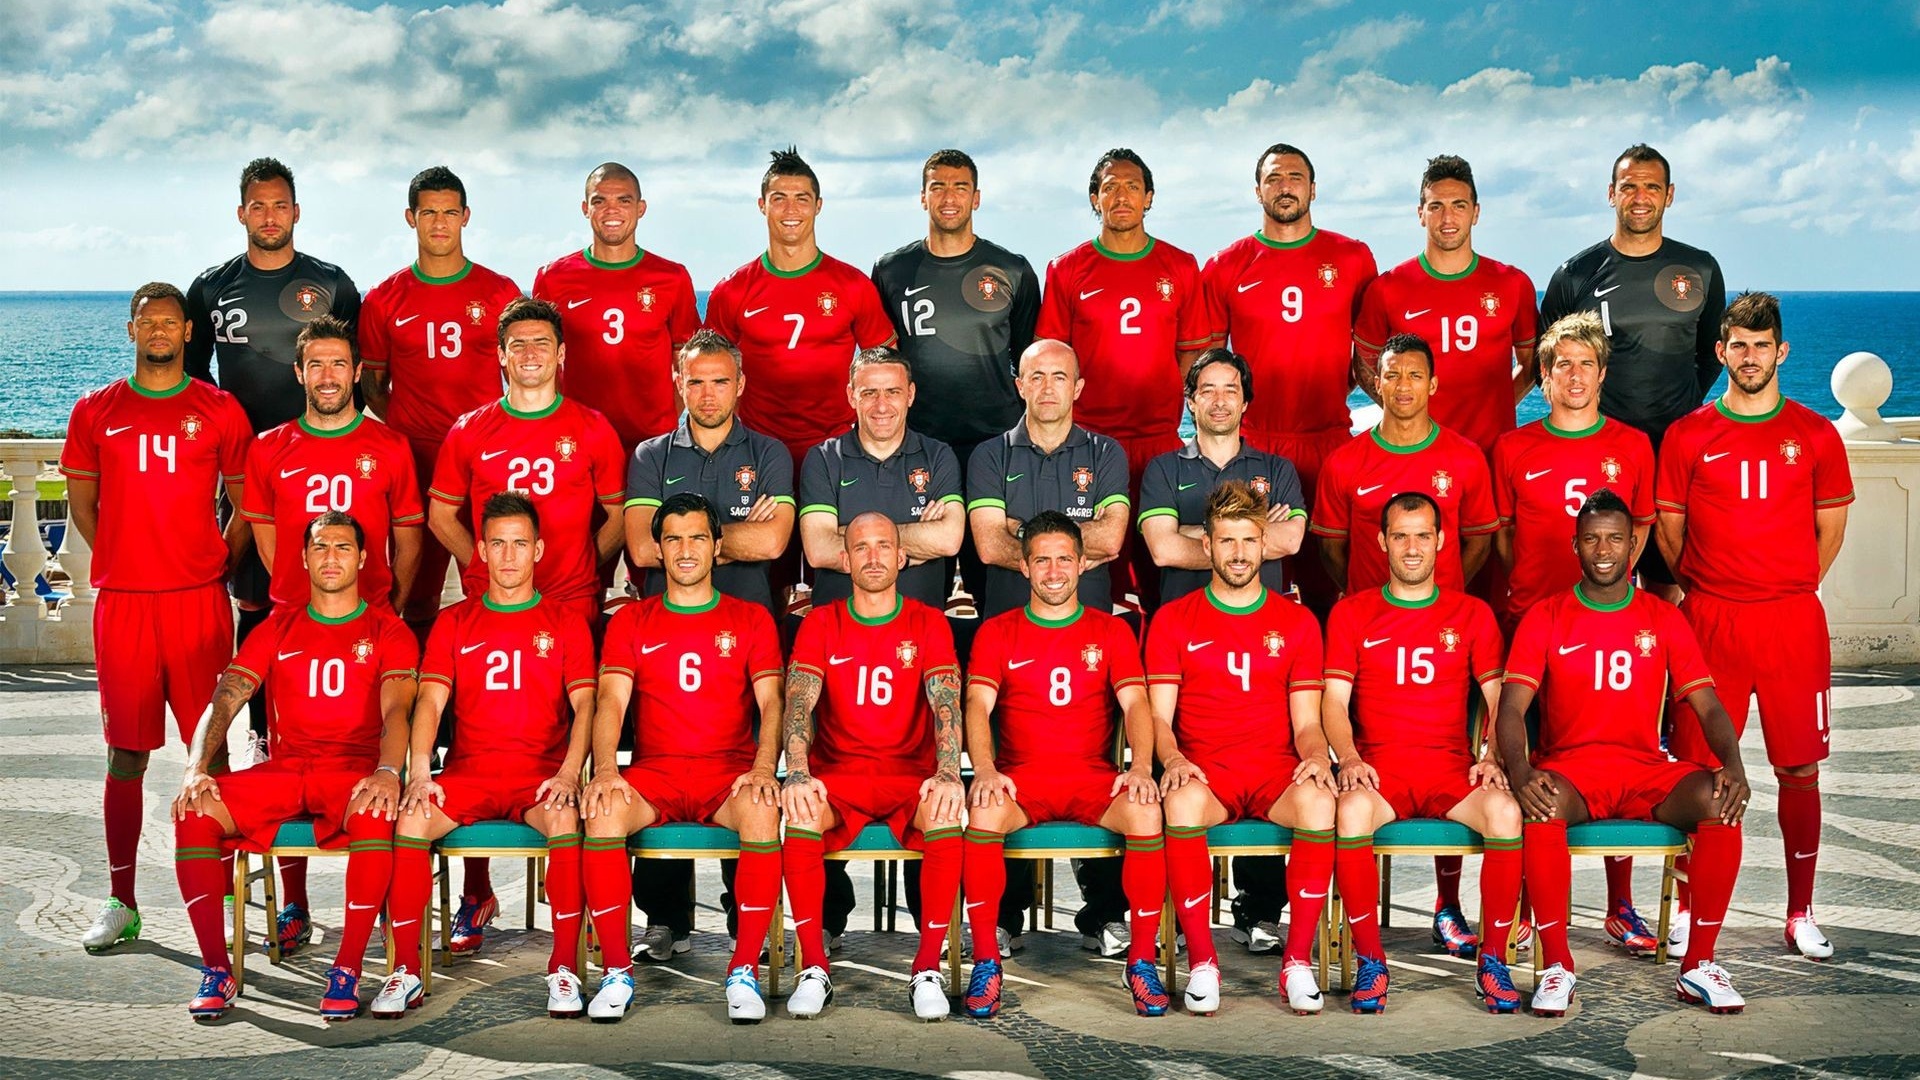 World Cup Portugal National Football Team Players